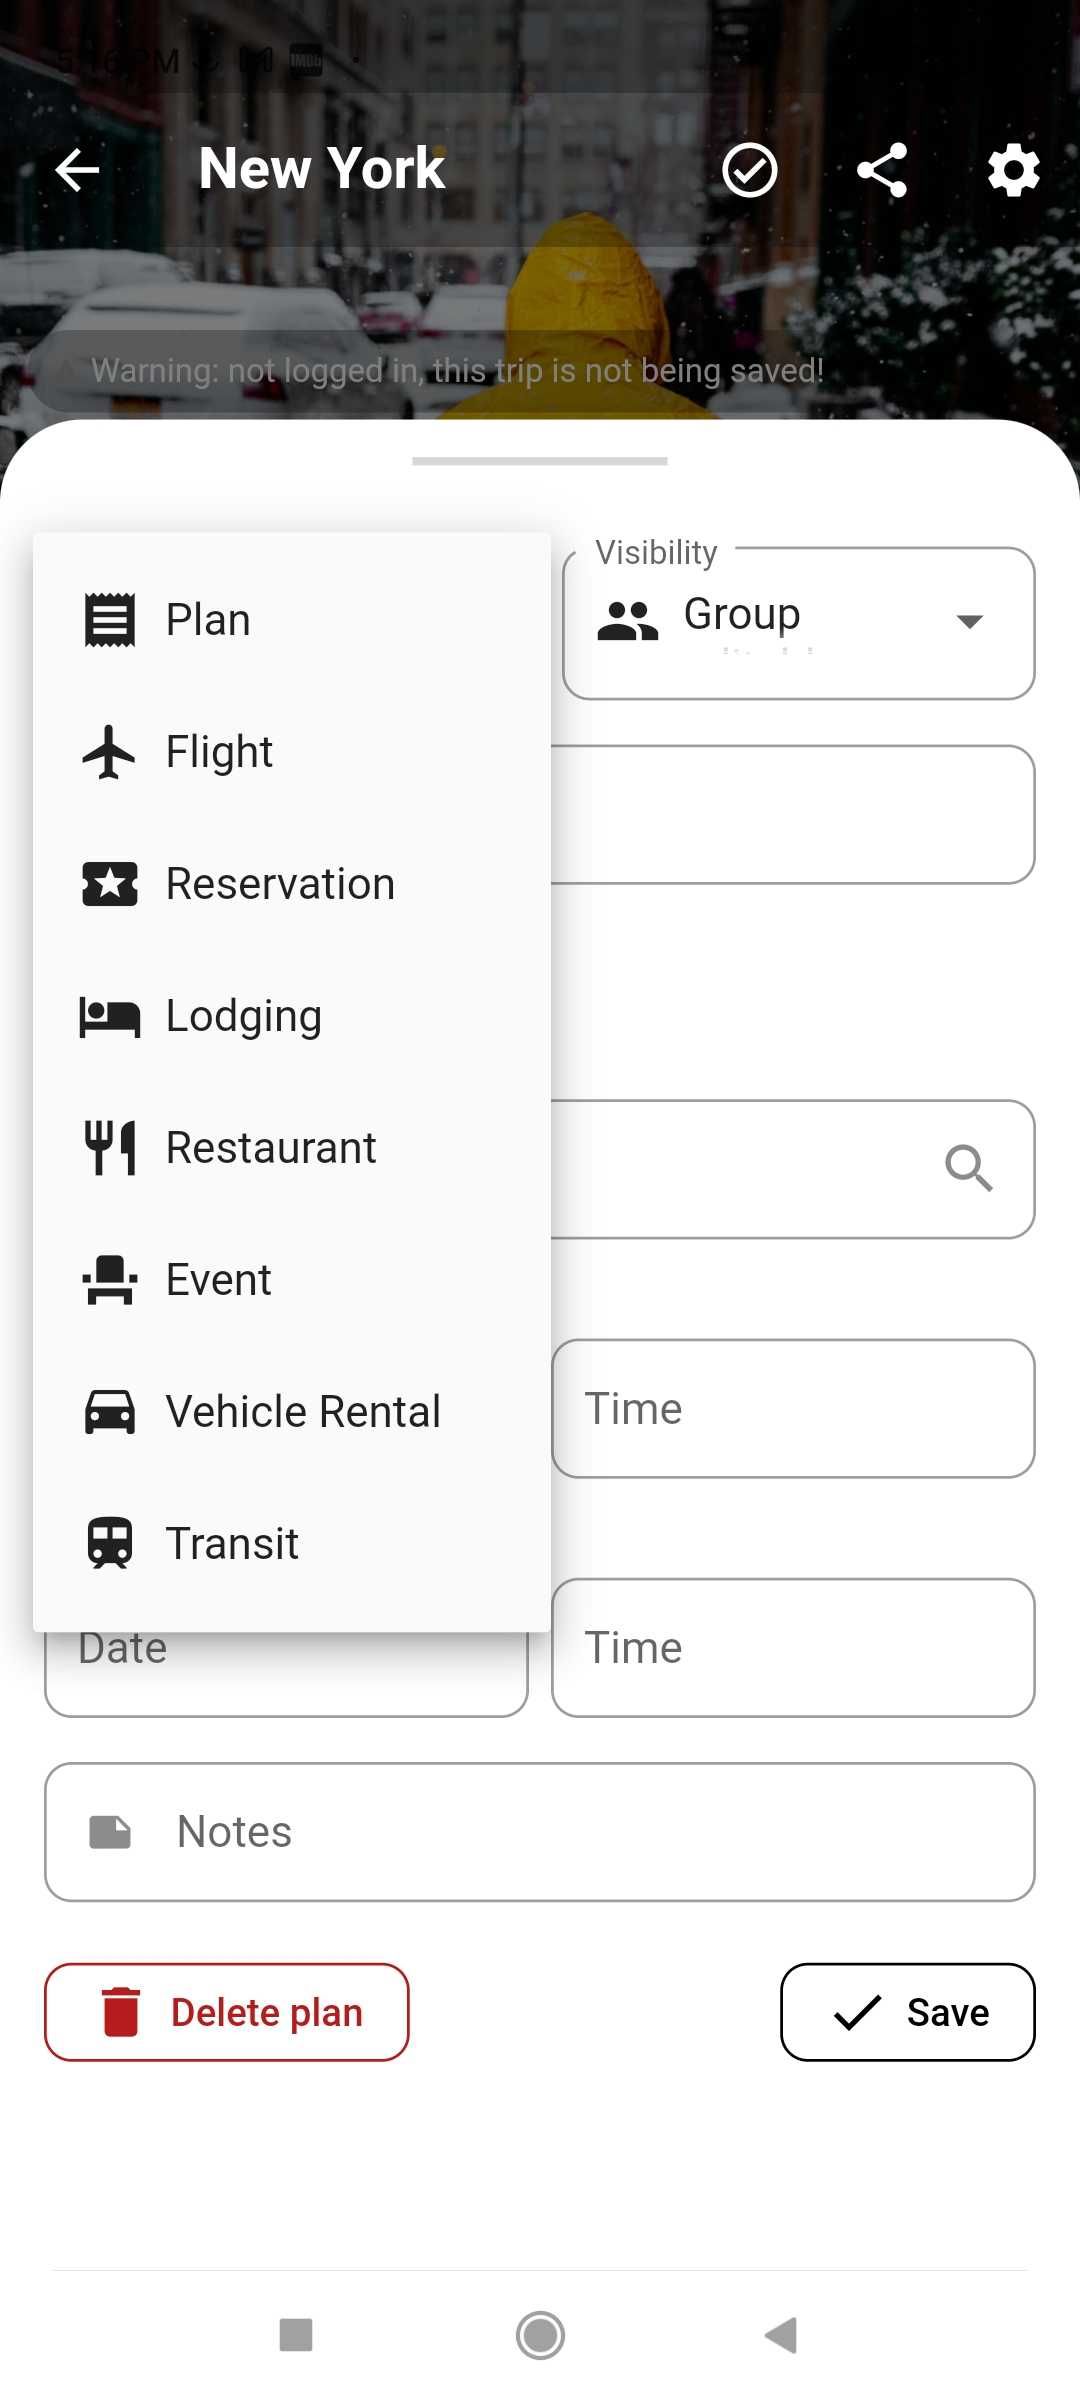 Plip lets you add details to each place you're visiting like GPS location, date, time, reservation or booking codes, and notes 